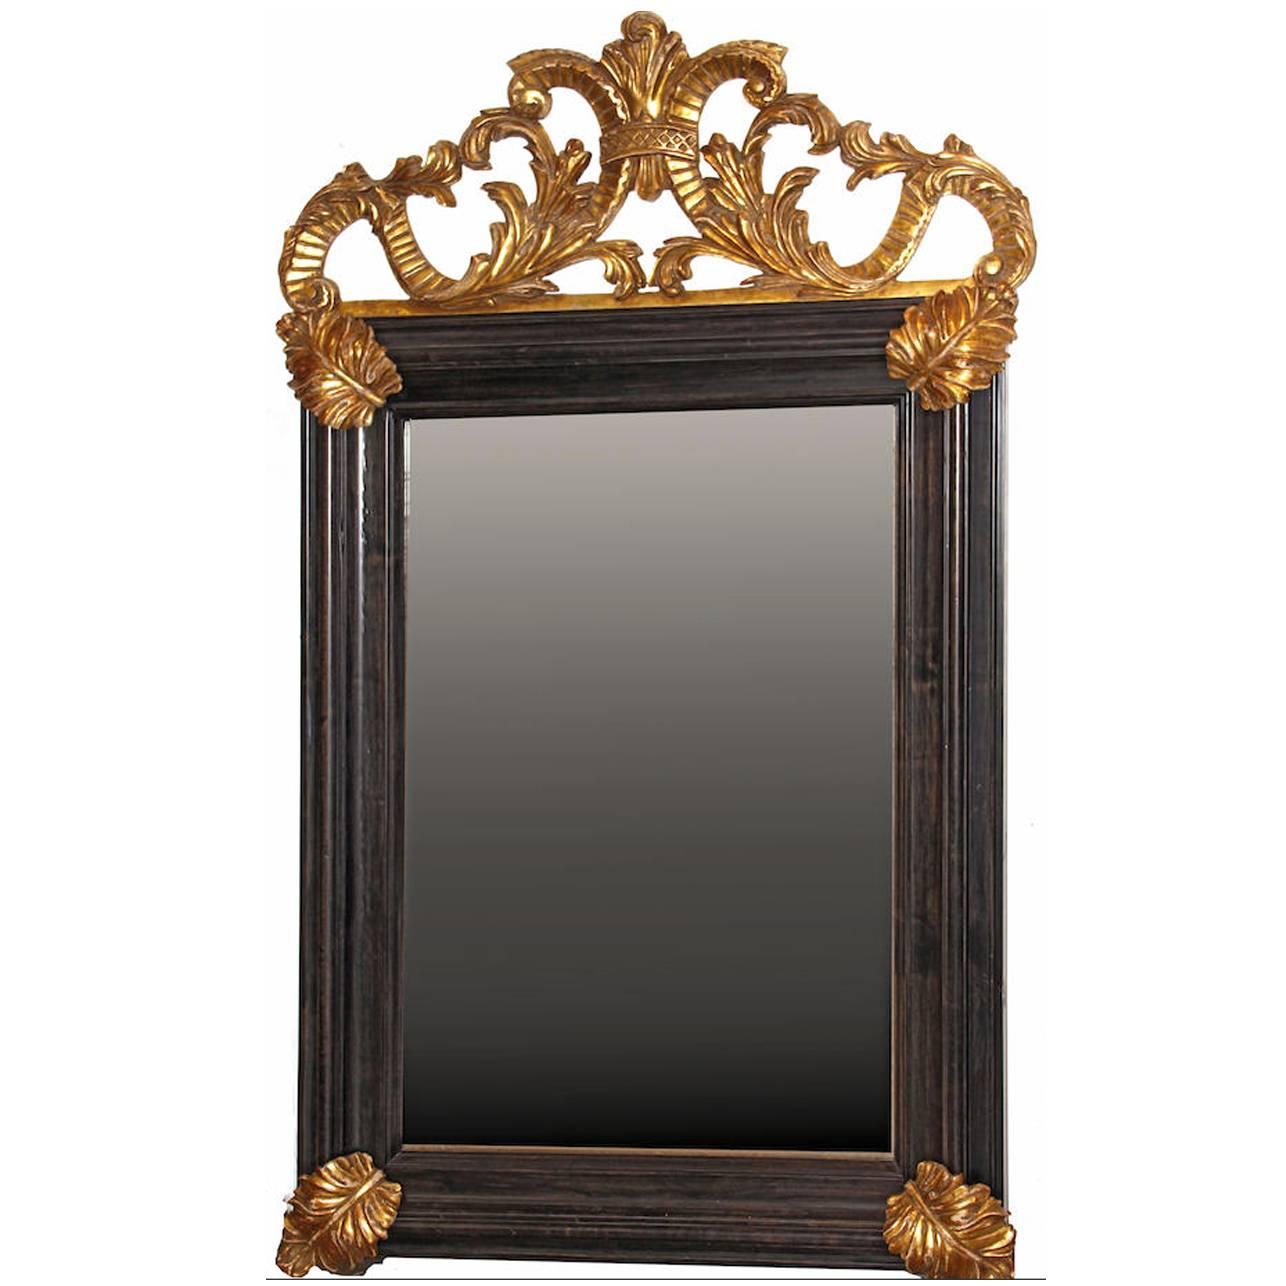 Italian baroque style  Mirror with hand-carved gilt details, aged mirror glass For Sale